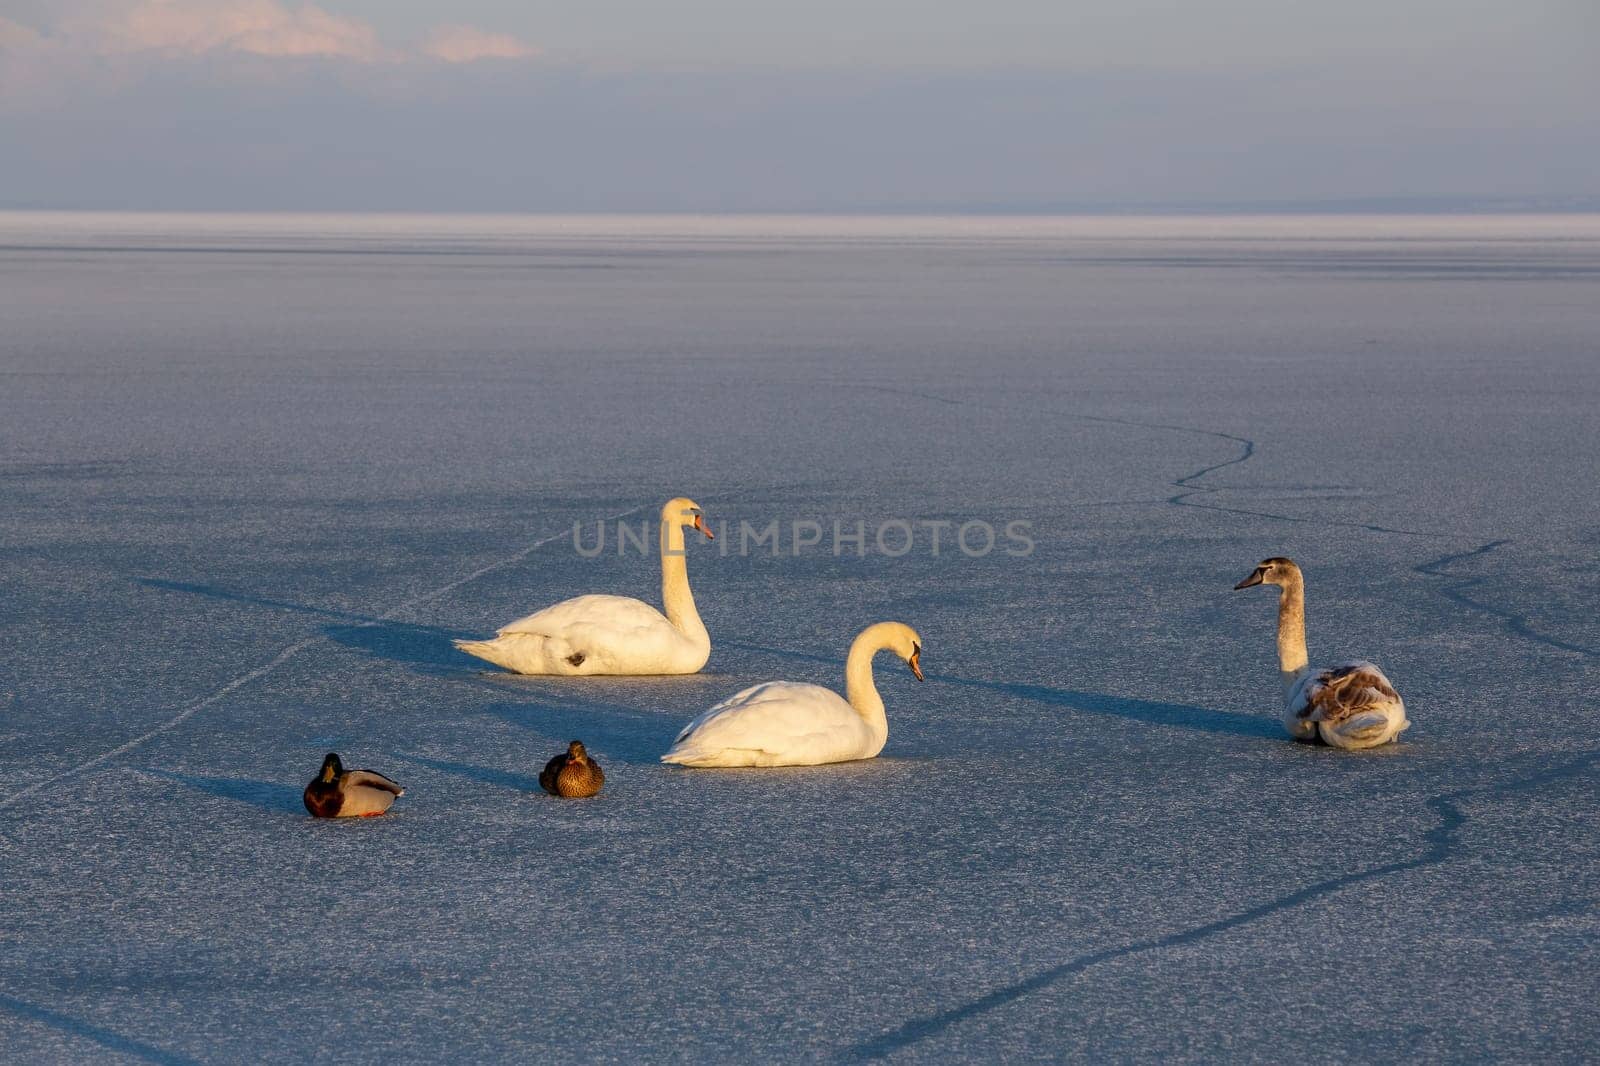 Lonely swans in winter on the lake Balaton, Hungary by Digoarpi